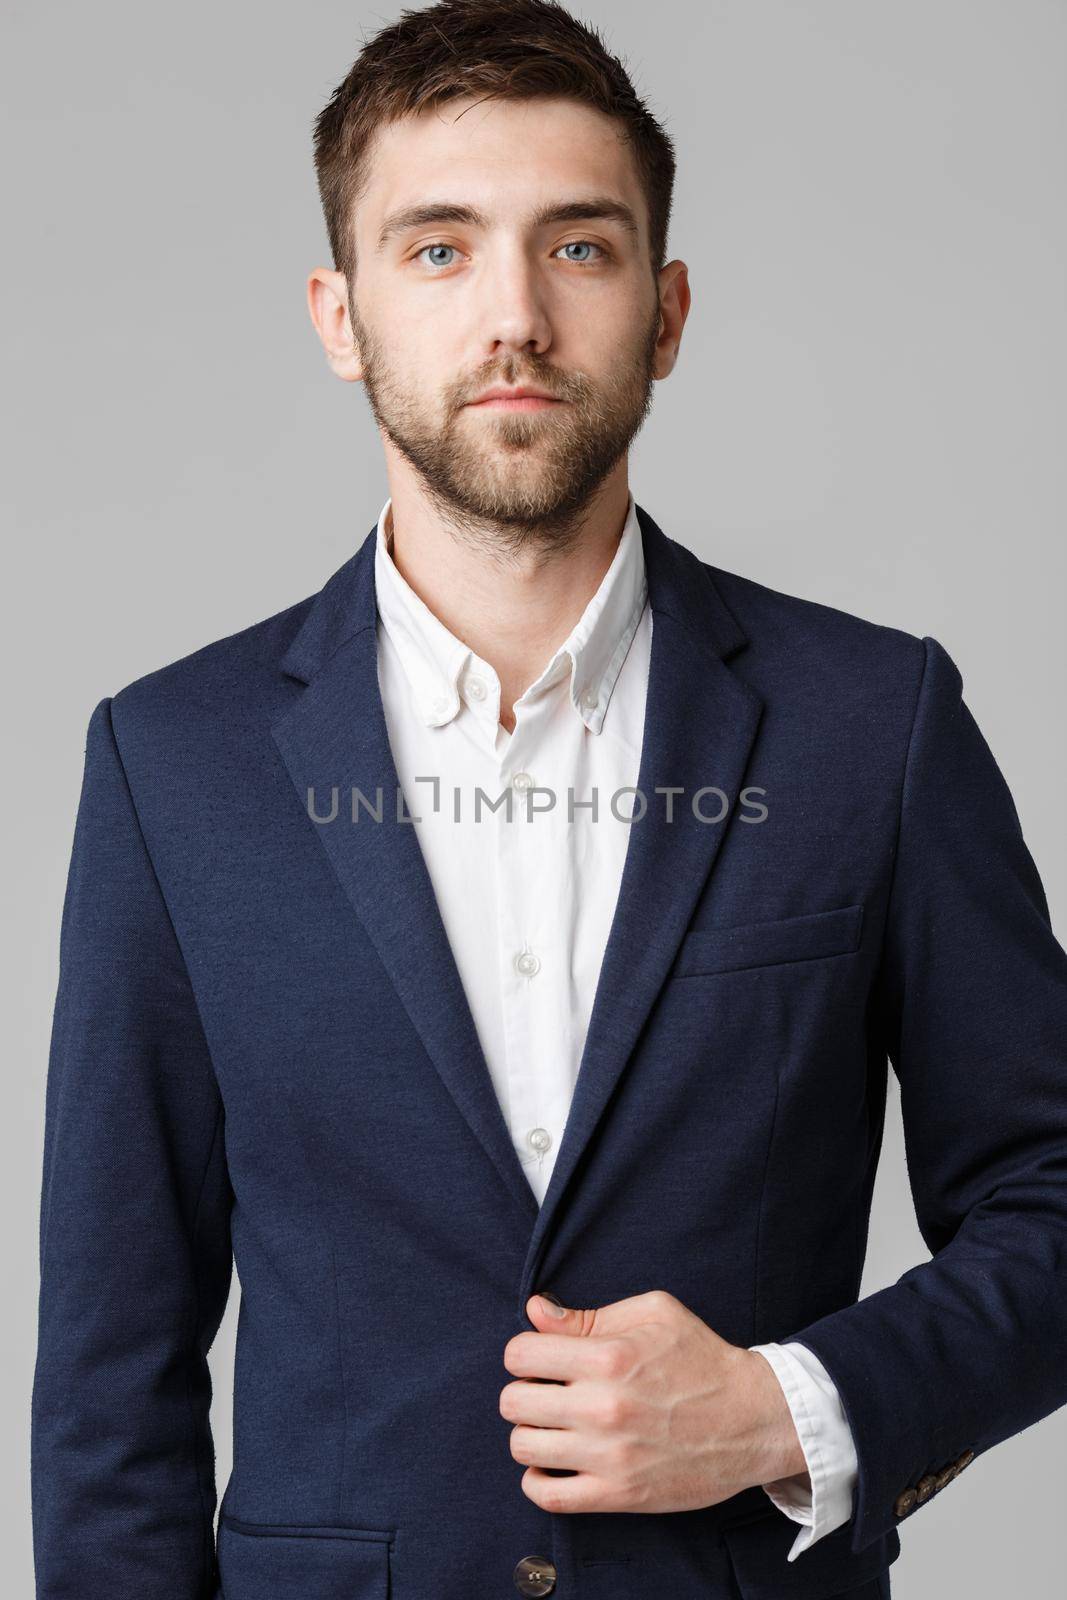 Business Concept - Young successful businessman posing over dark background. Isolated White Background. Copy space.